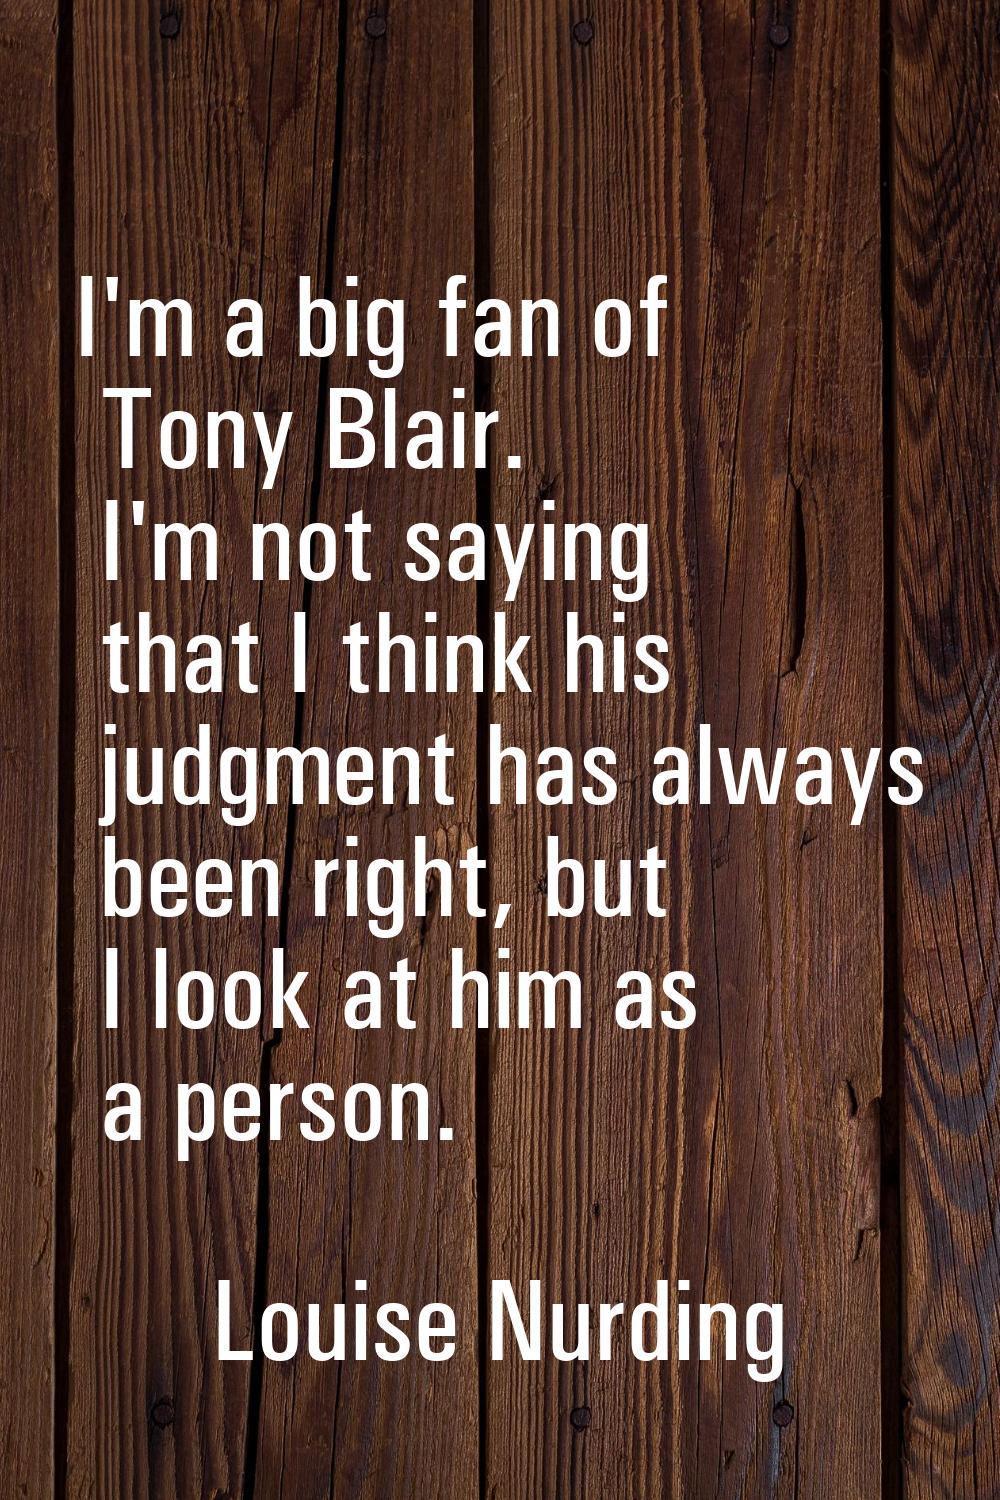 I'm a big fan of Tony Blair. I'm not saying that I think his judgment has always been right, but I 